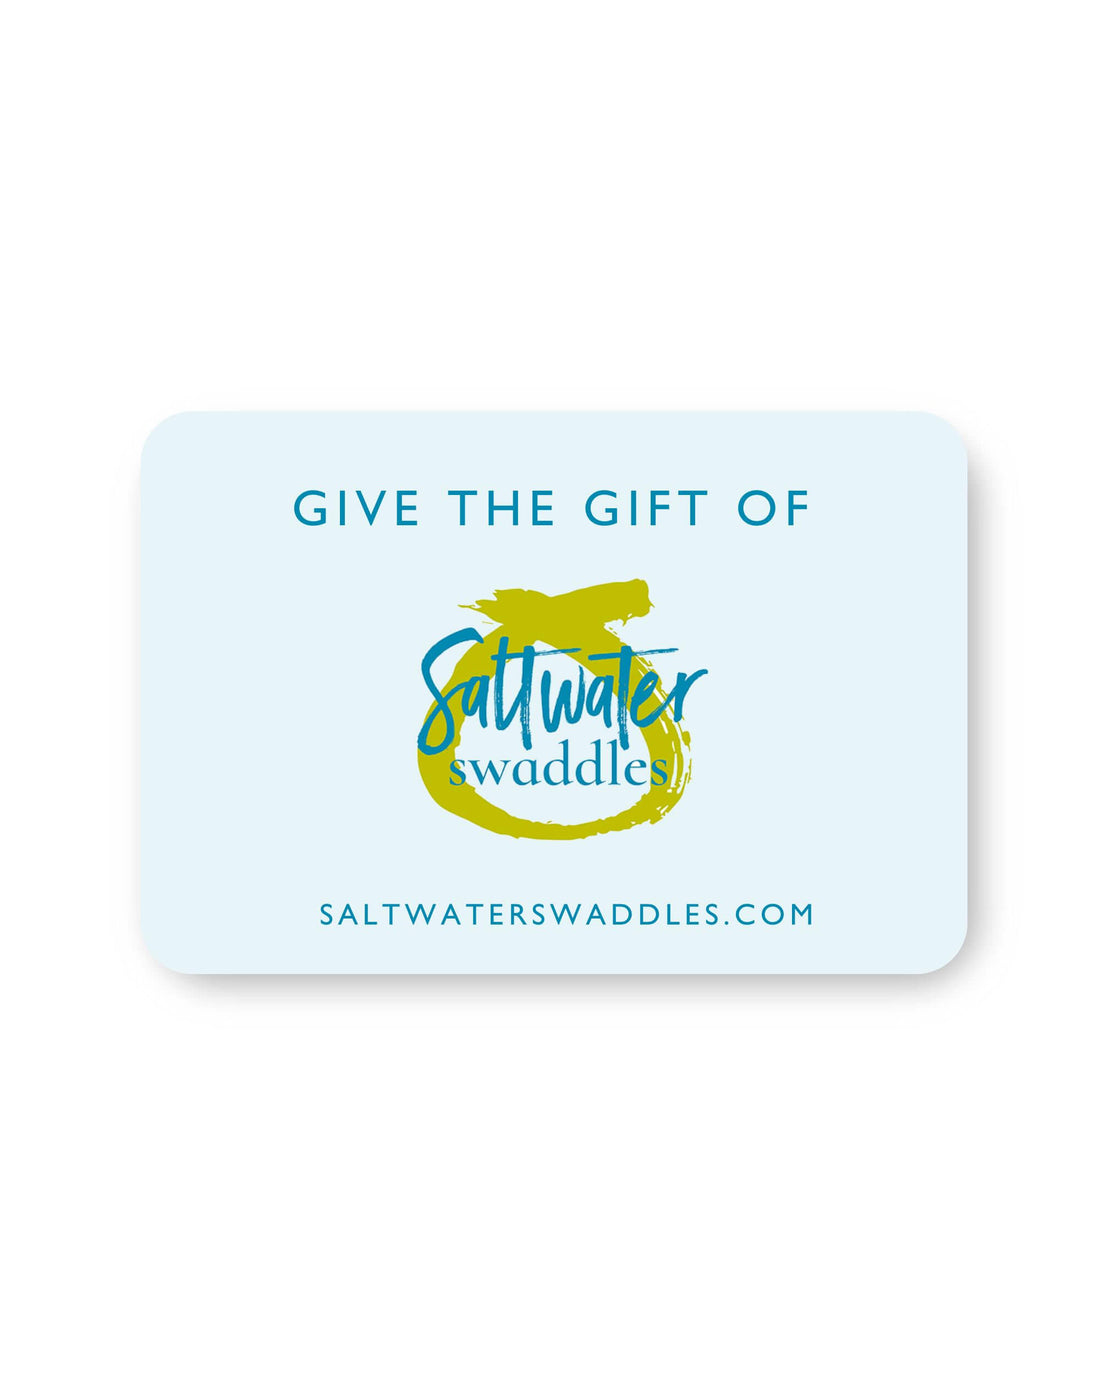 Saltwater Swaddles Gift Card